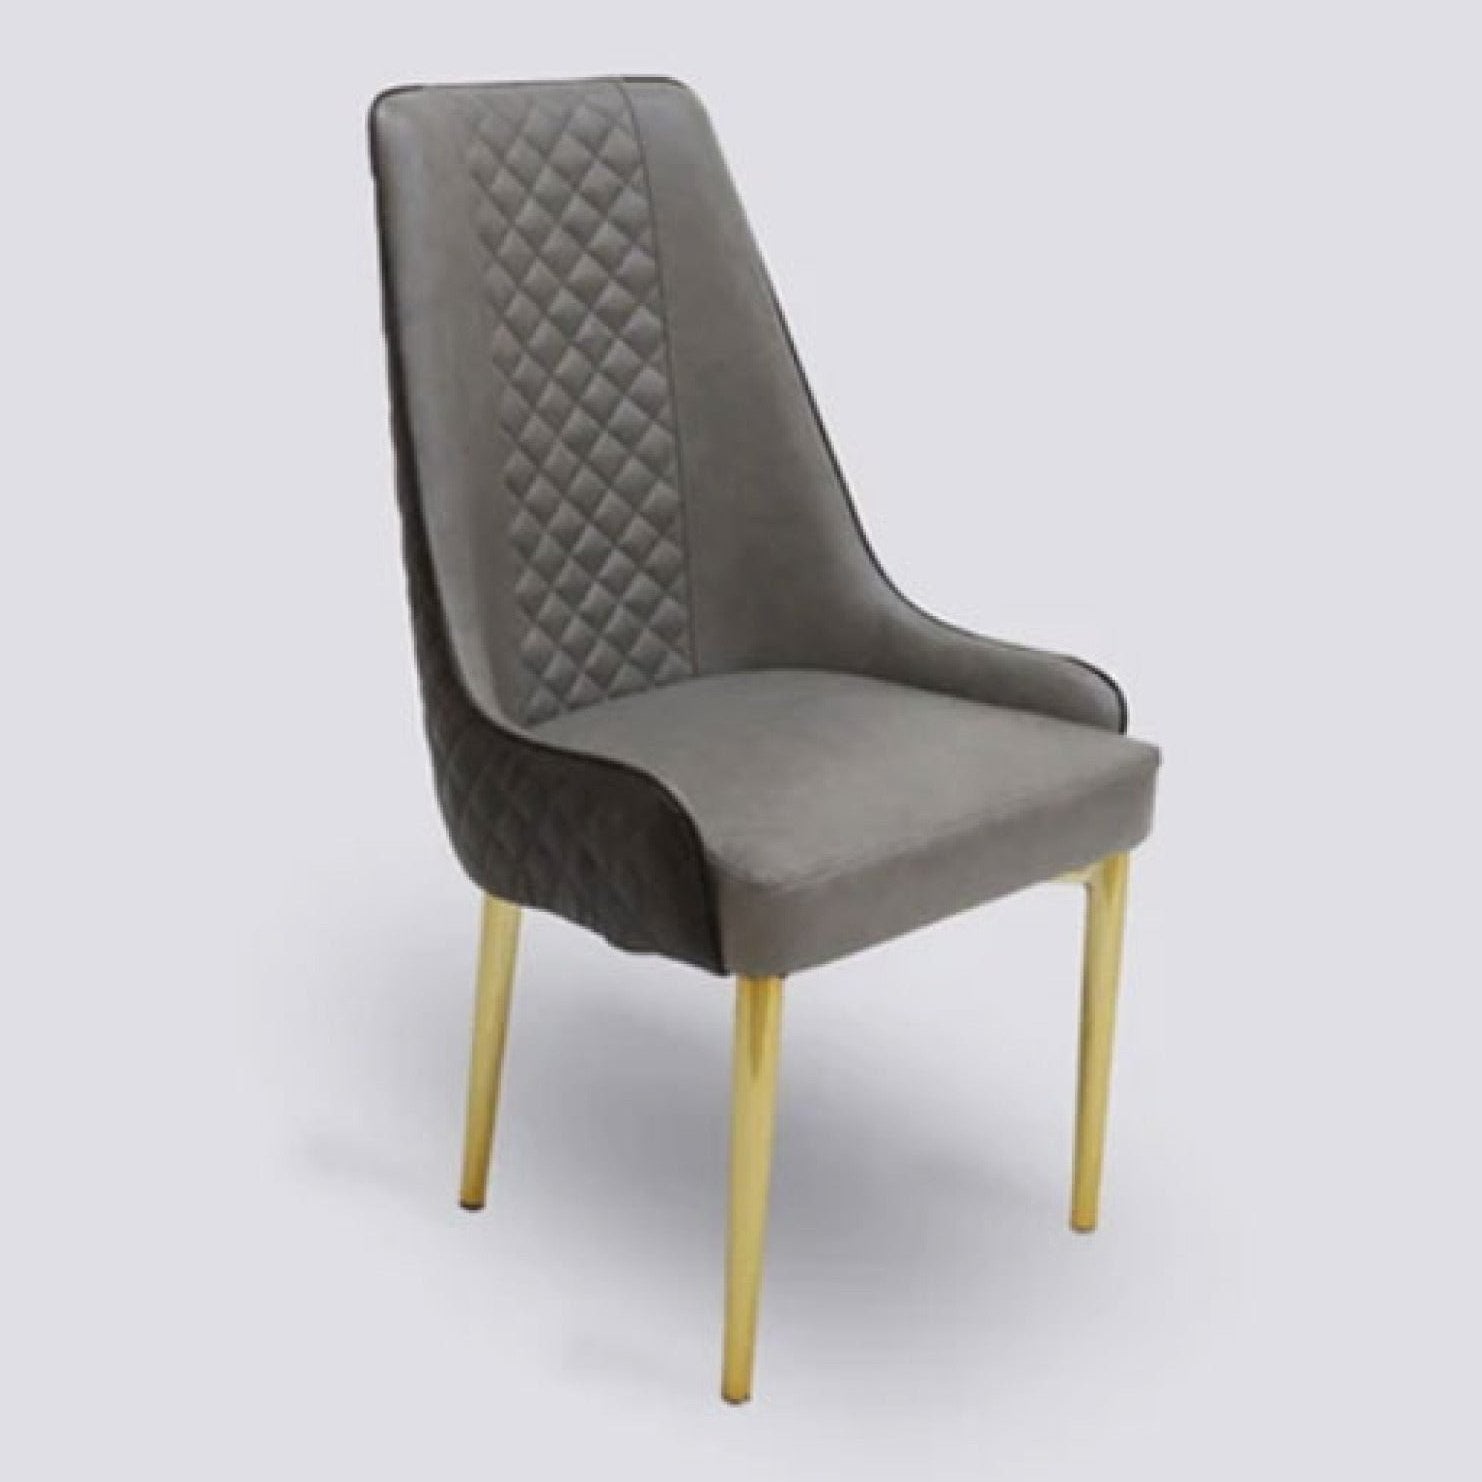 LUX-501 DINING CHAIR Mobel Furniture